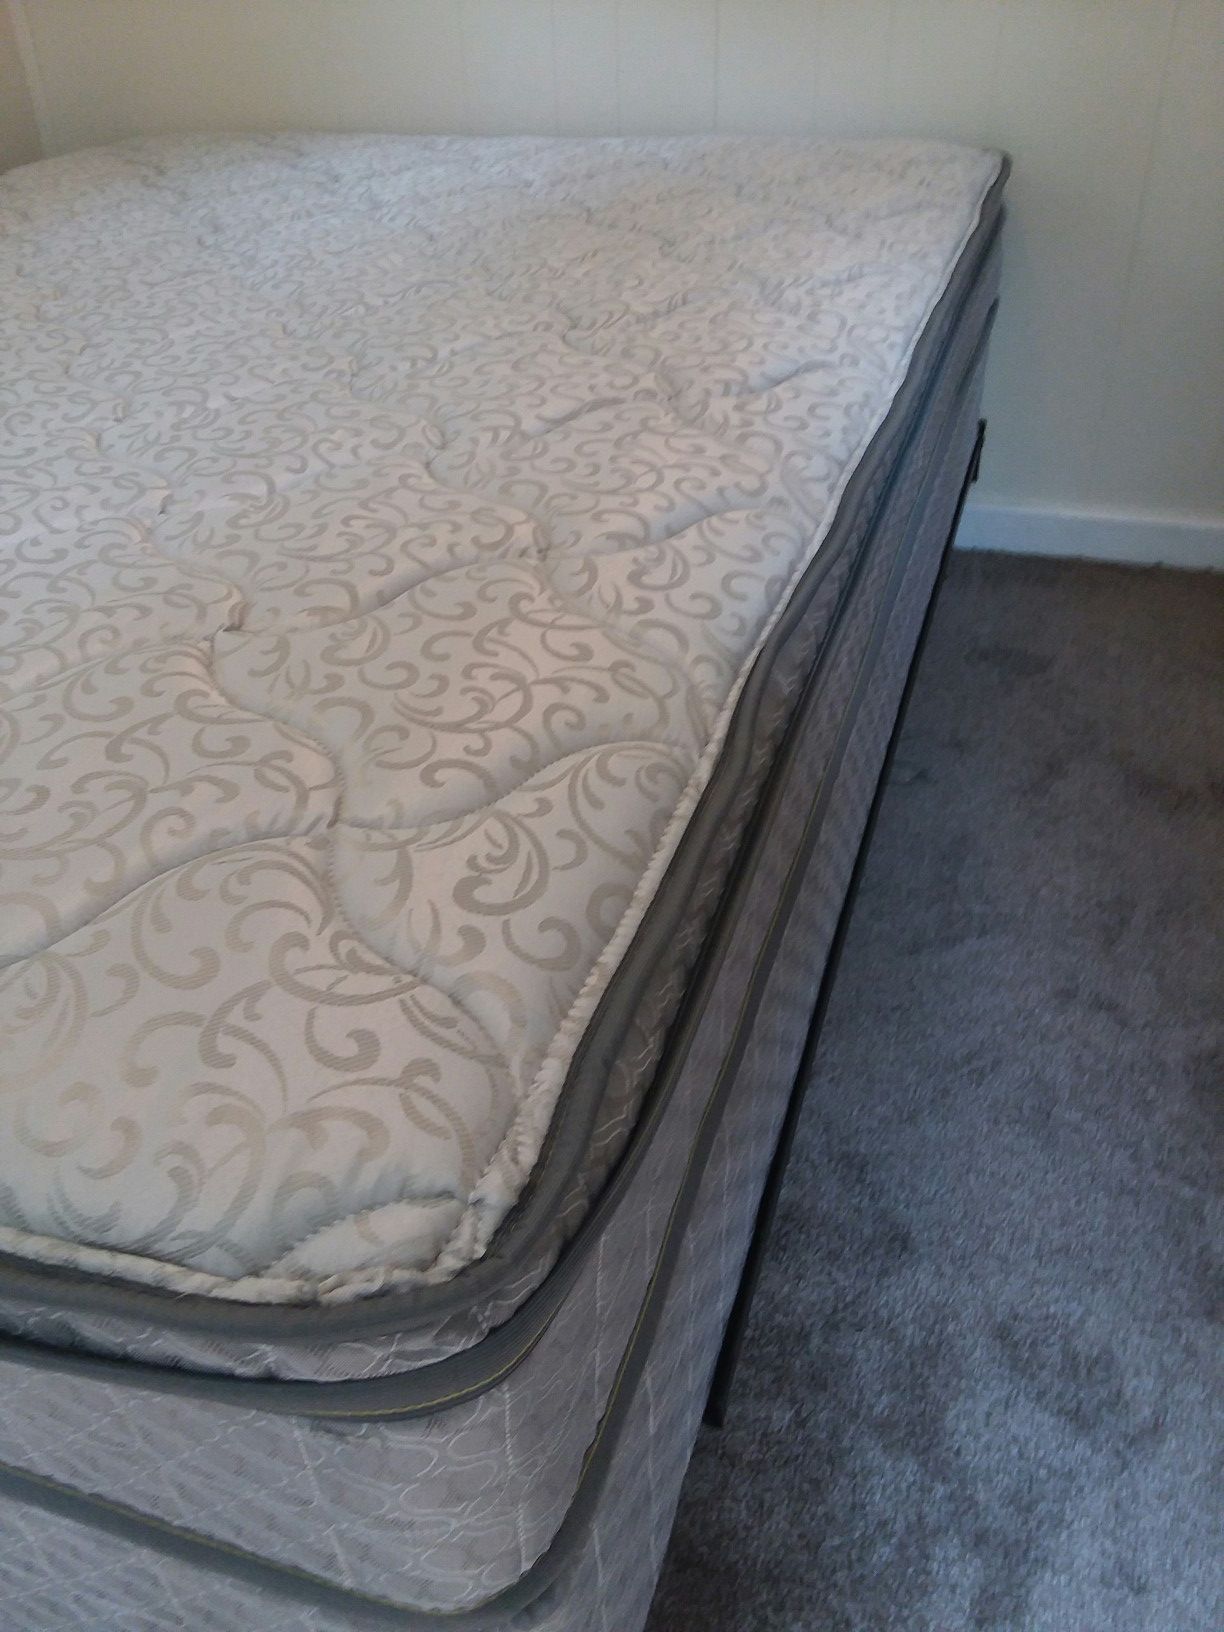 Liquidating MATTRESS and BOX SPRINGS as sets or separately